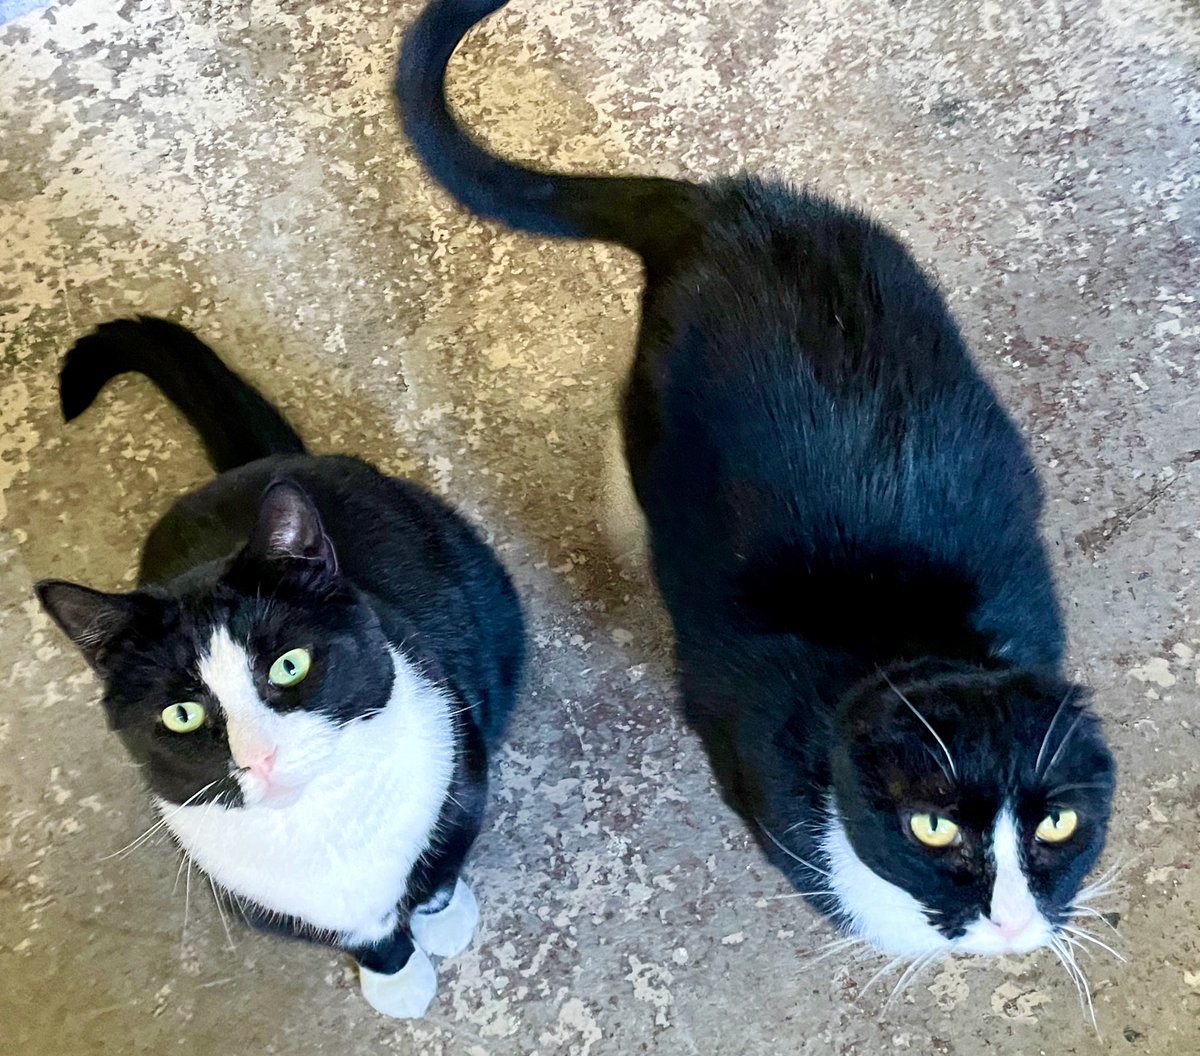 💖💖Sol & Lulu are already counting the days (7) til their prospective adopters visit! We're counting too - so excited!! #adoptdontshop #va #virginia #thursday #purrsday #CatsOfTwitter #goodnews #PositiveMindset #PositiveEnergy #friends #cats #pets #home #thursdayvibes